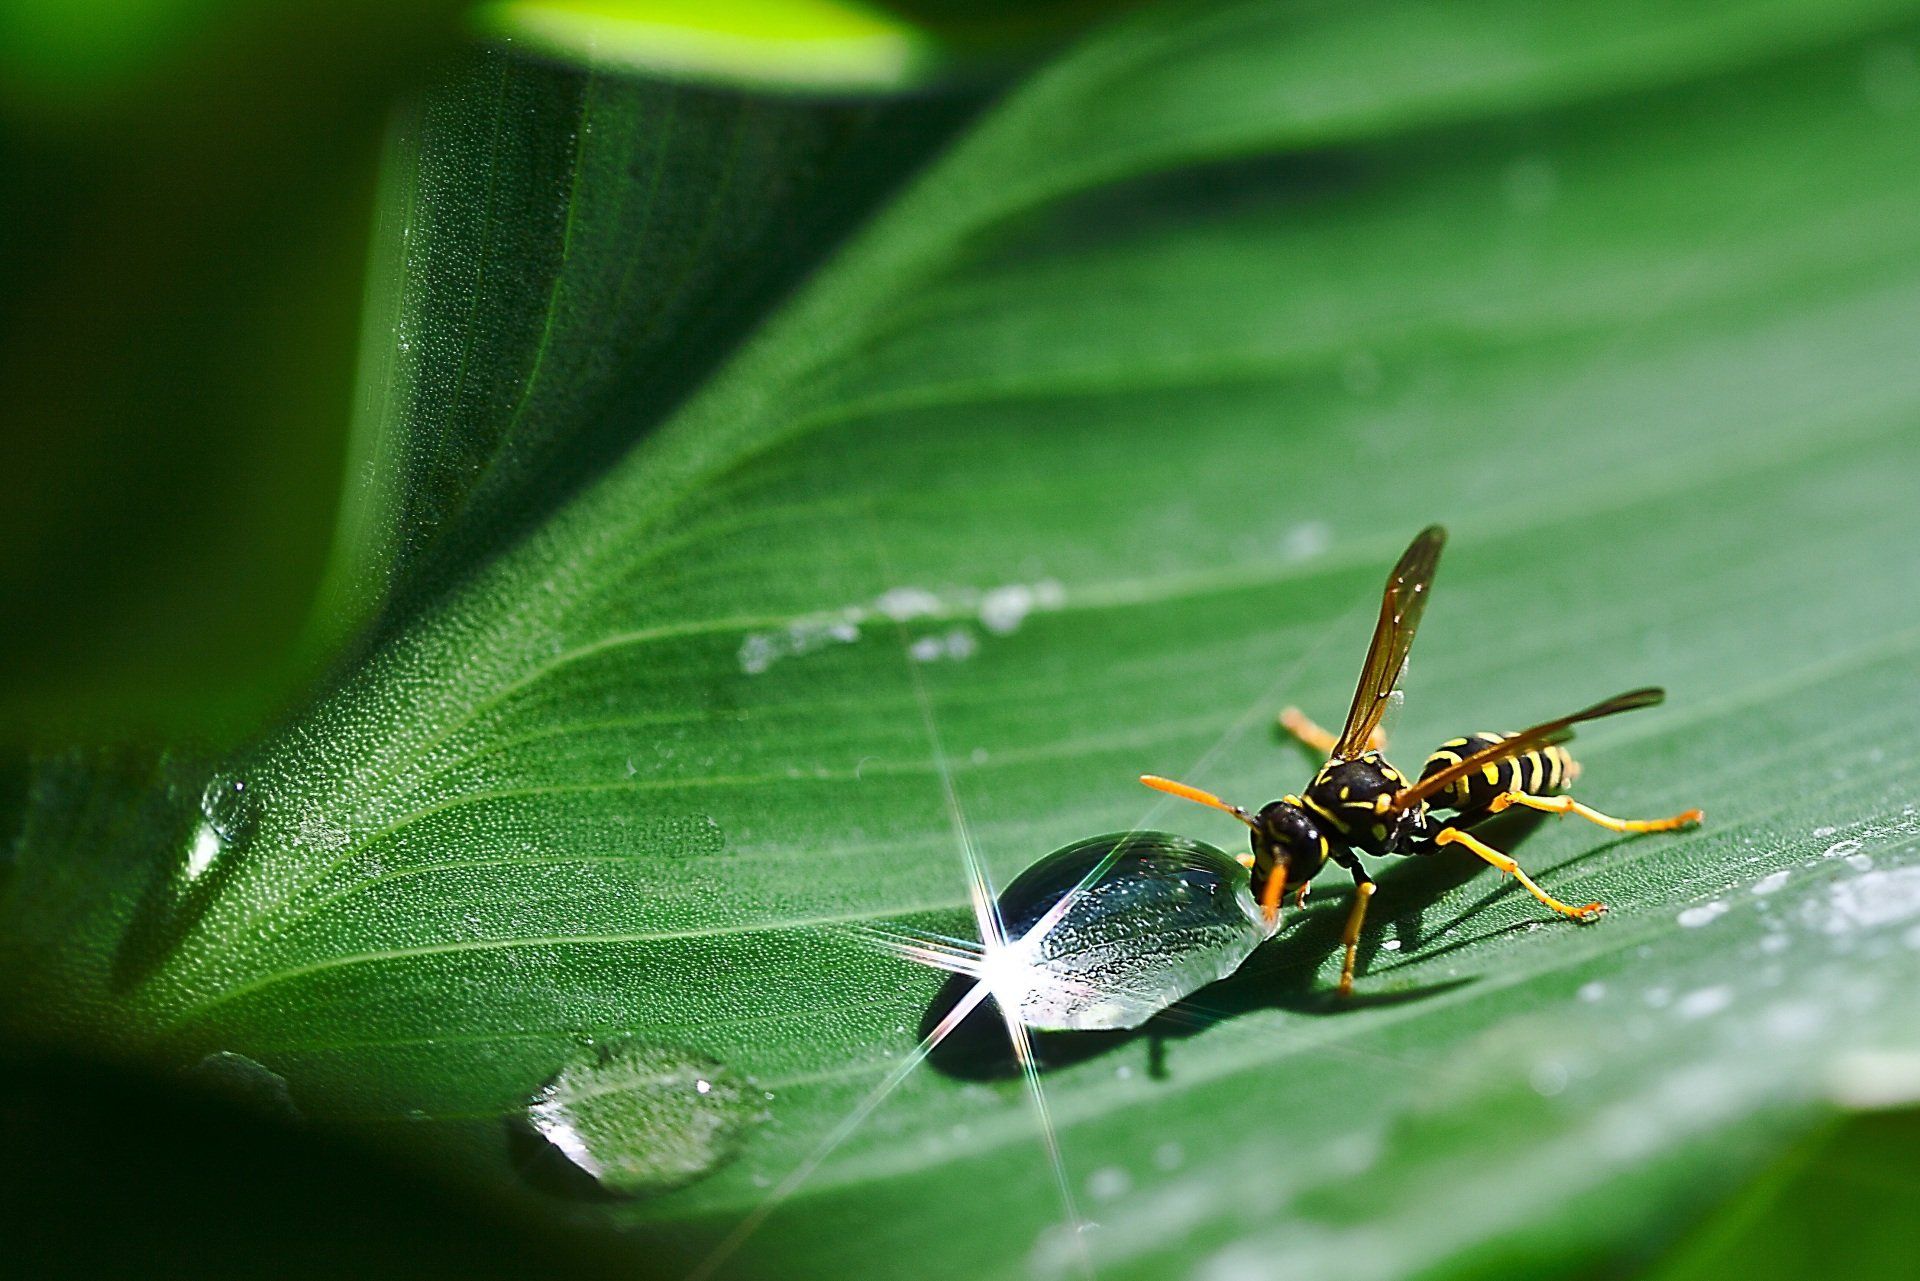 A wasp is sitting on a green leaf with a drop of water on it.